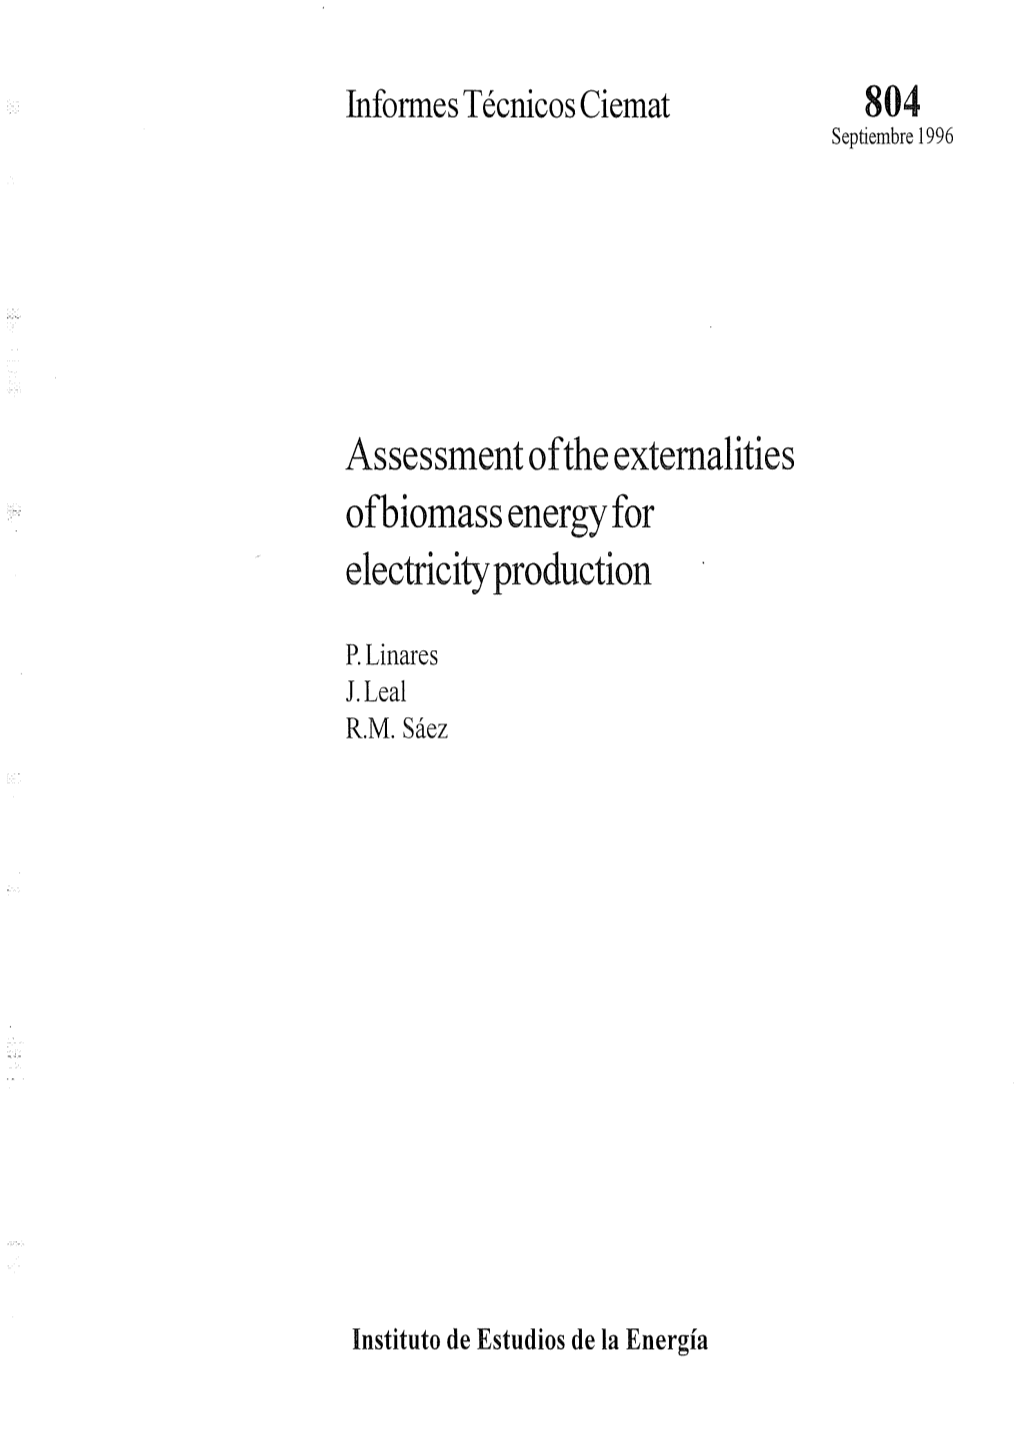 Assessment of the Externalise of Biomass Energy for Electricity Production